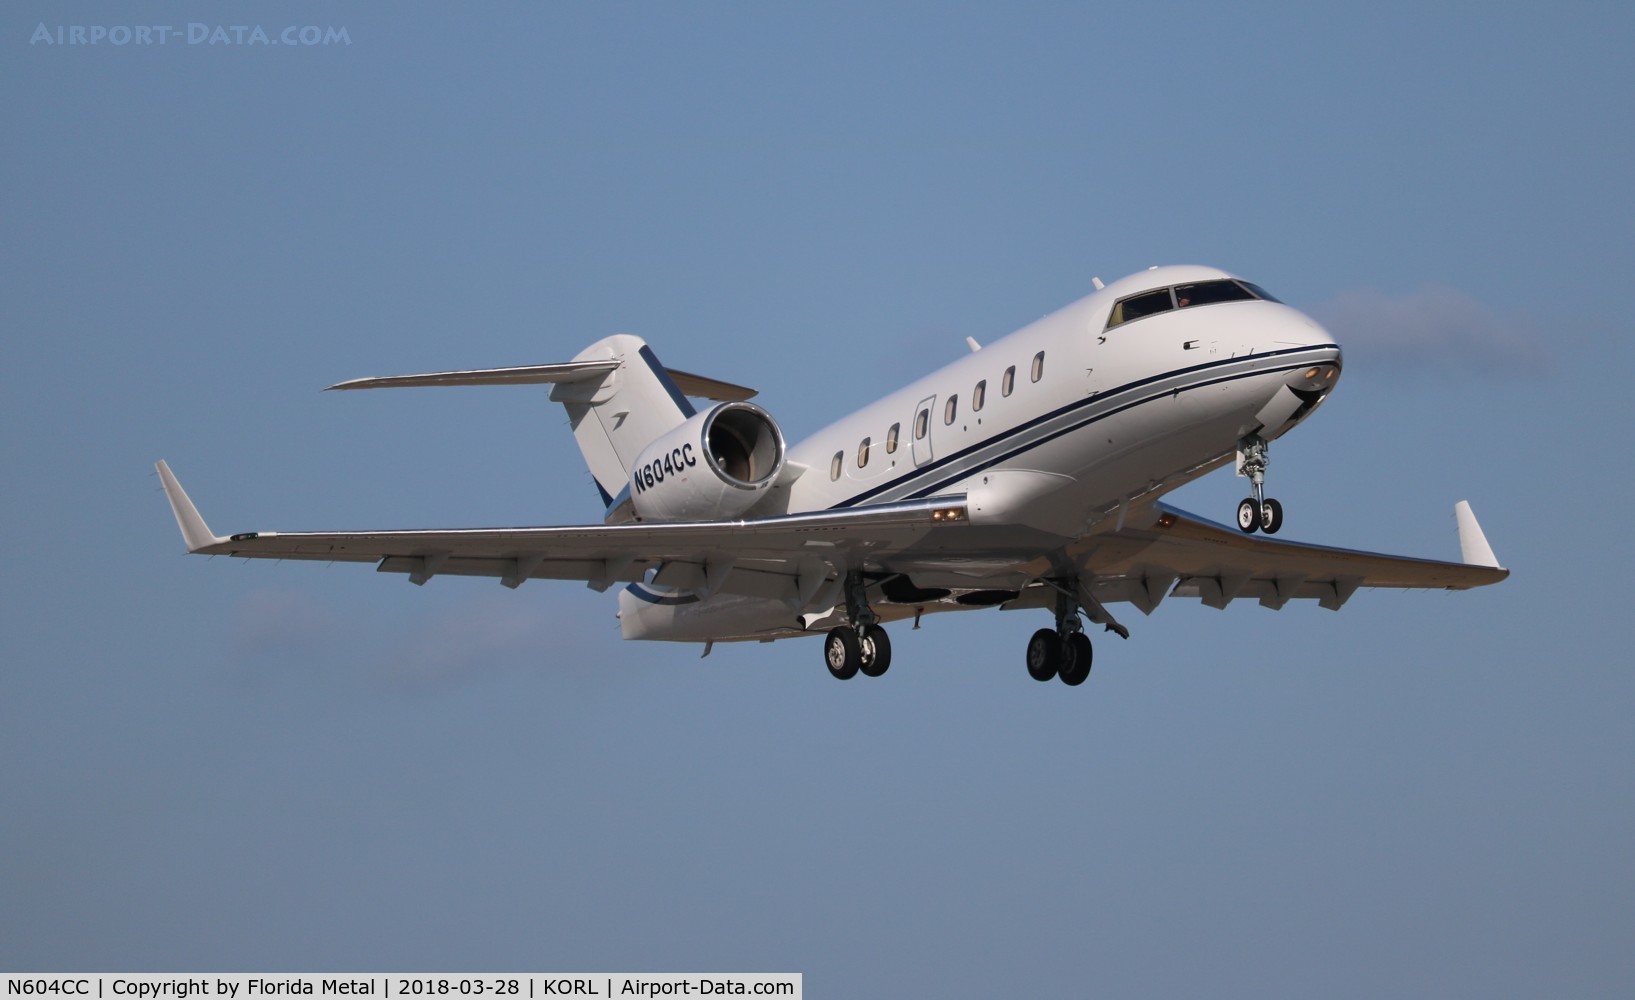 N604CC, 2005 Bombardier Challenger 604 (CL-600-2B16) C/N 5633, Challenger 604 zx